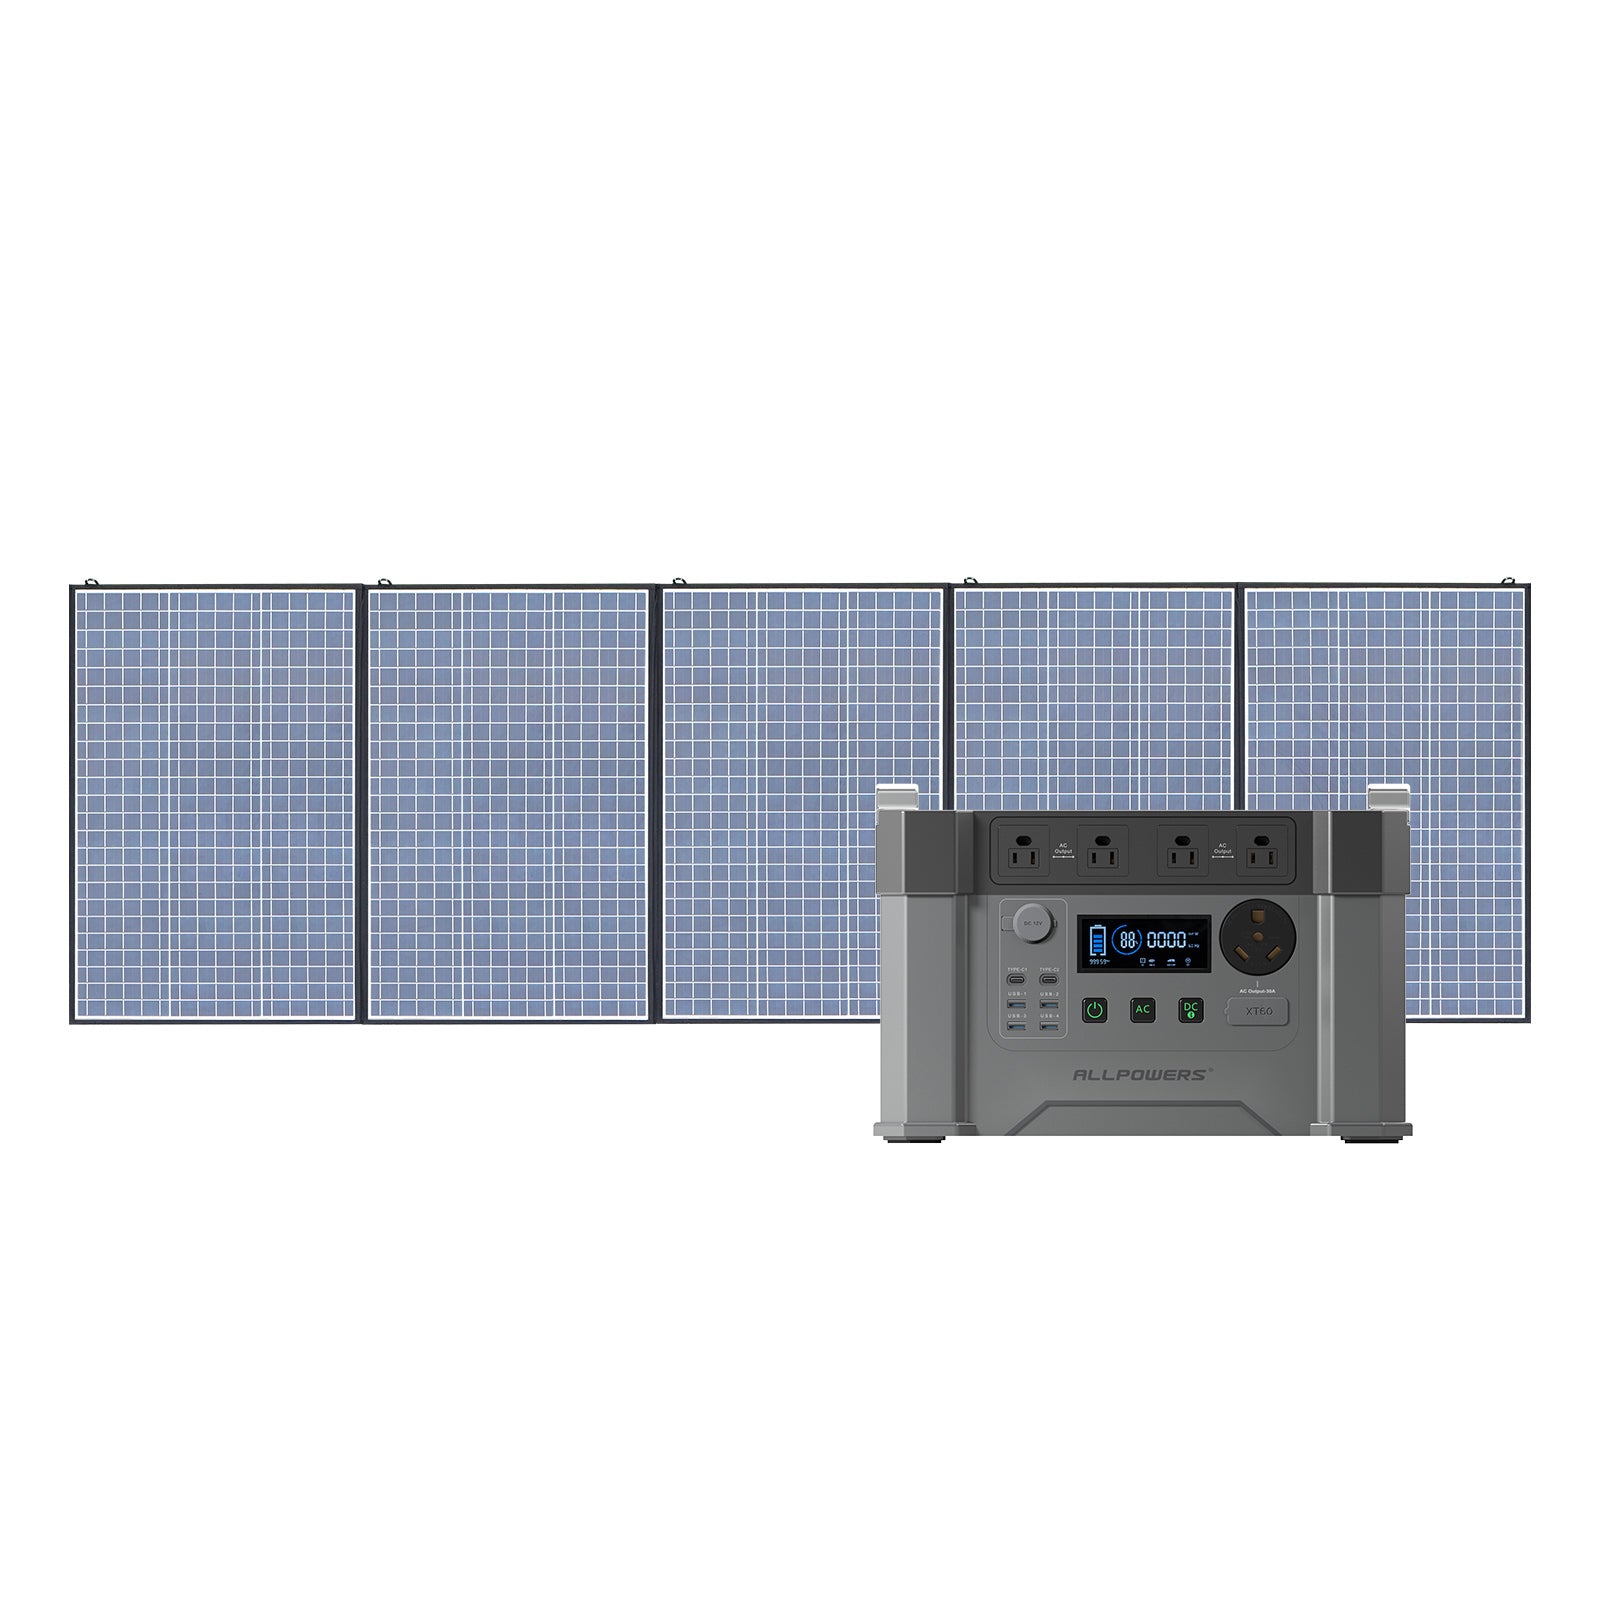 ALLPOWERS S2000 Pro Portable Power Station 2400W 1500Wh with Solar Panels